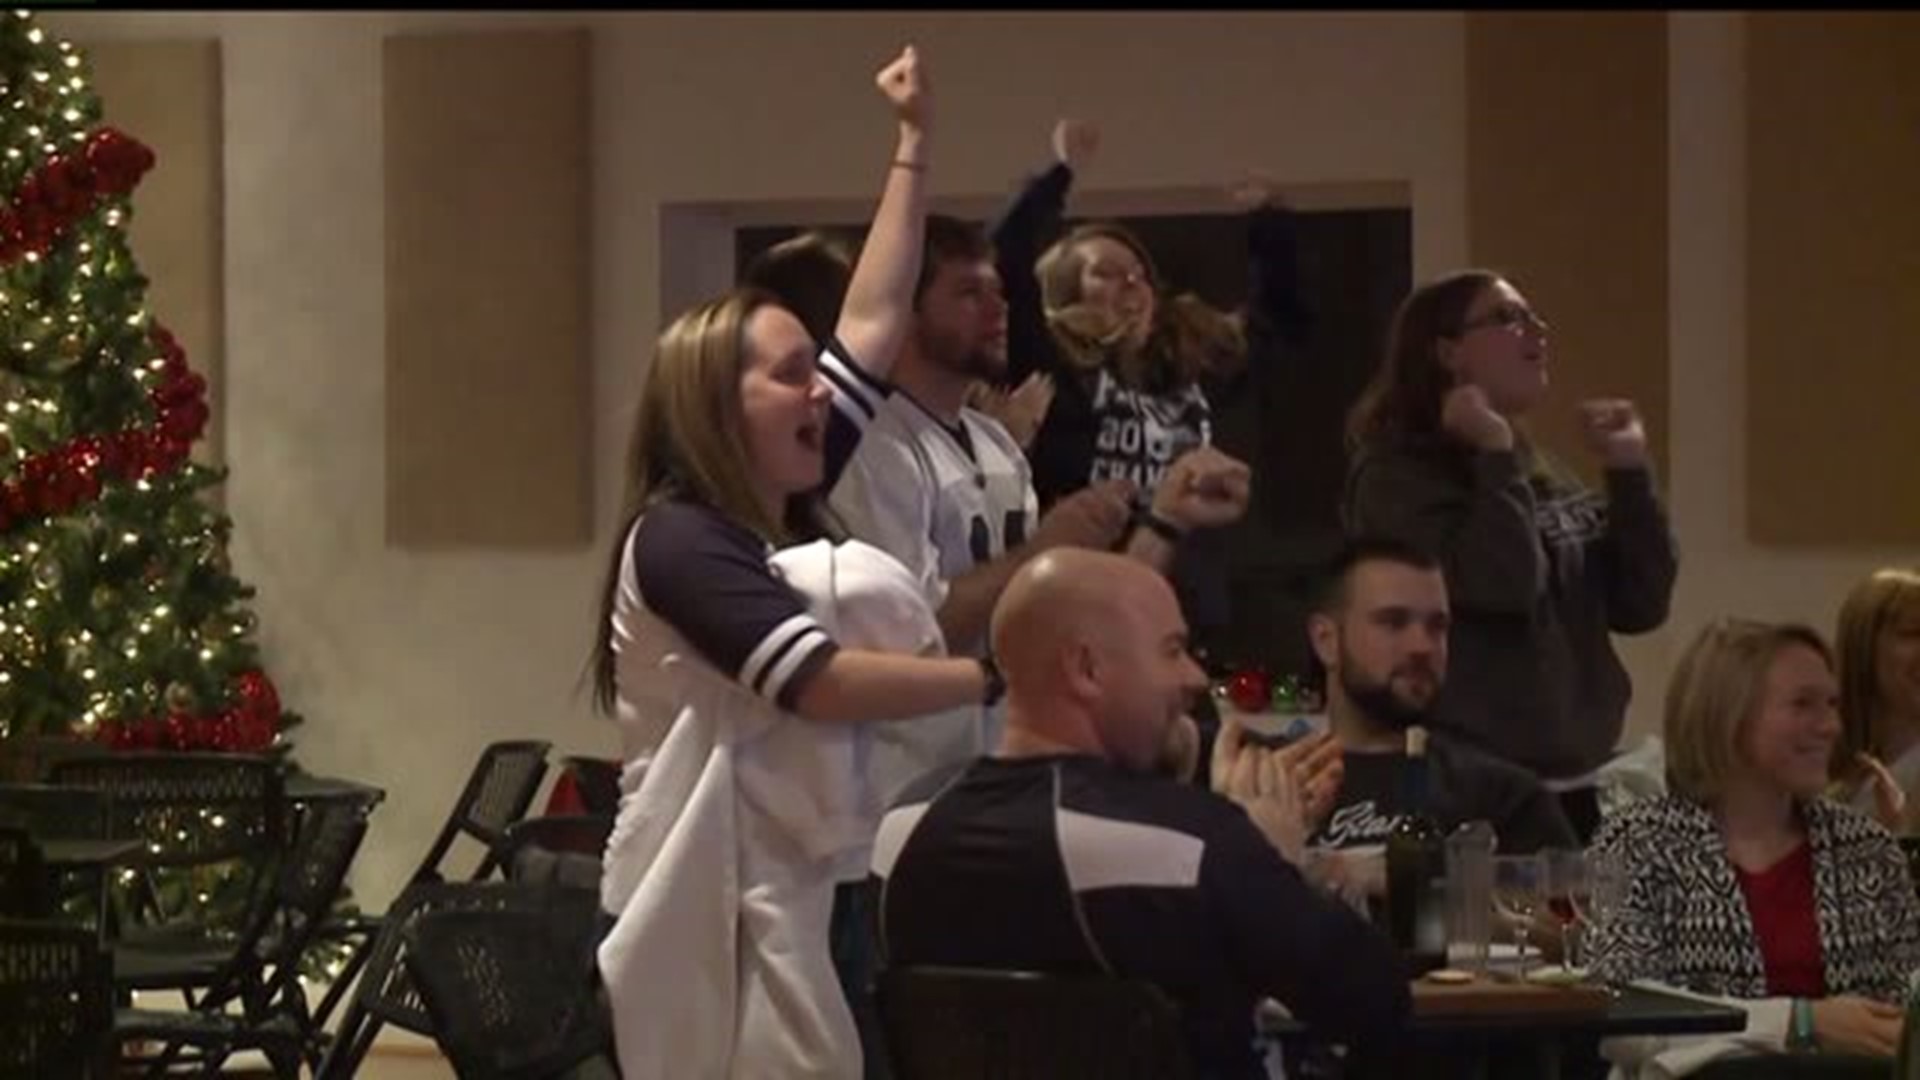 Fans come out to support Penn State Nittany Lions